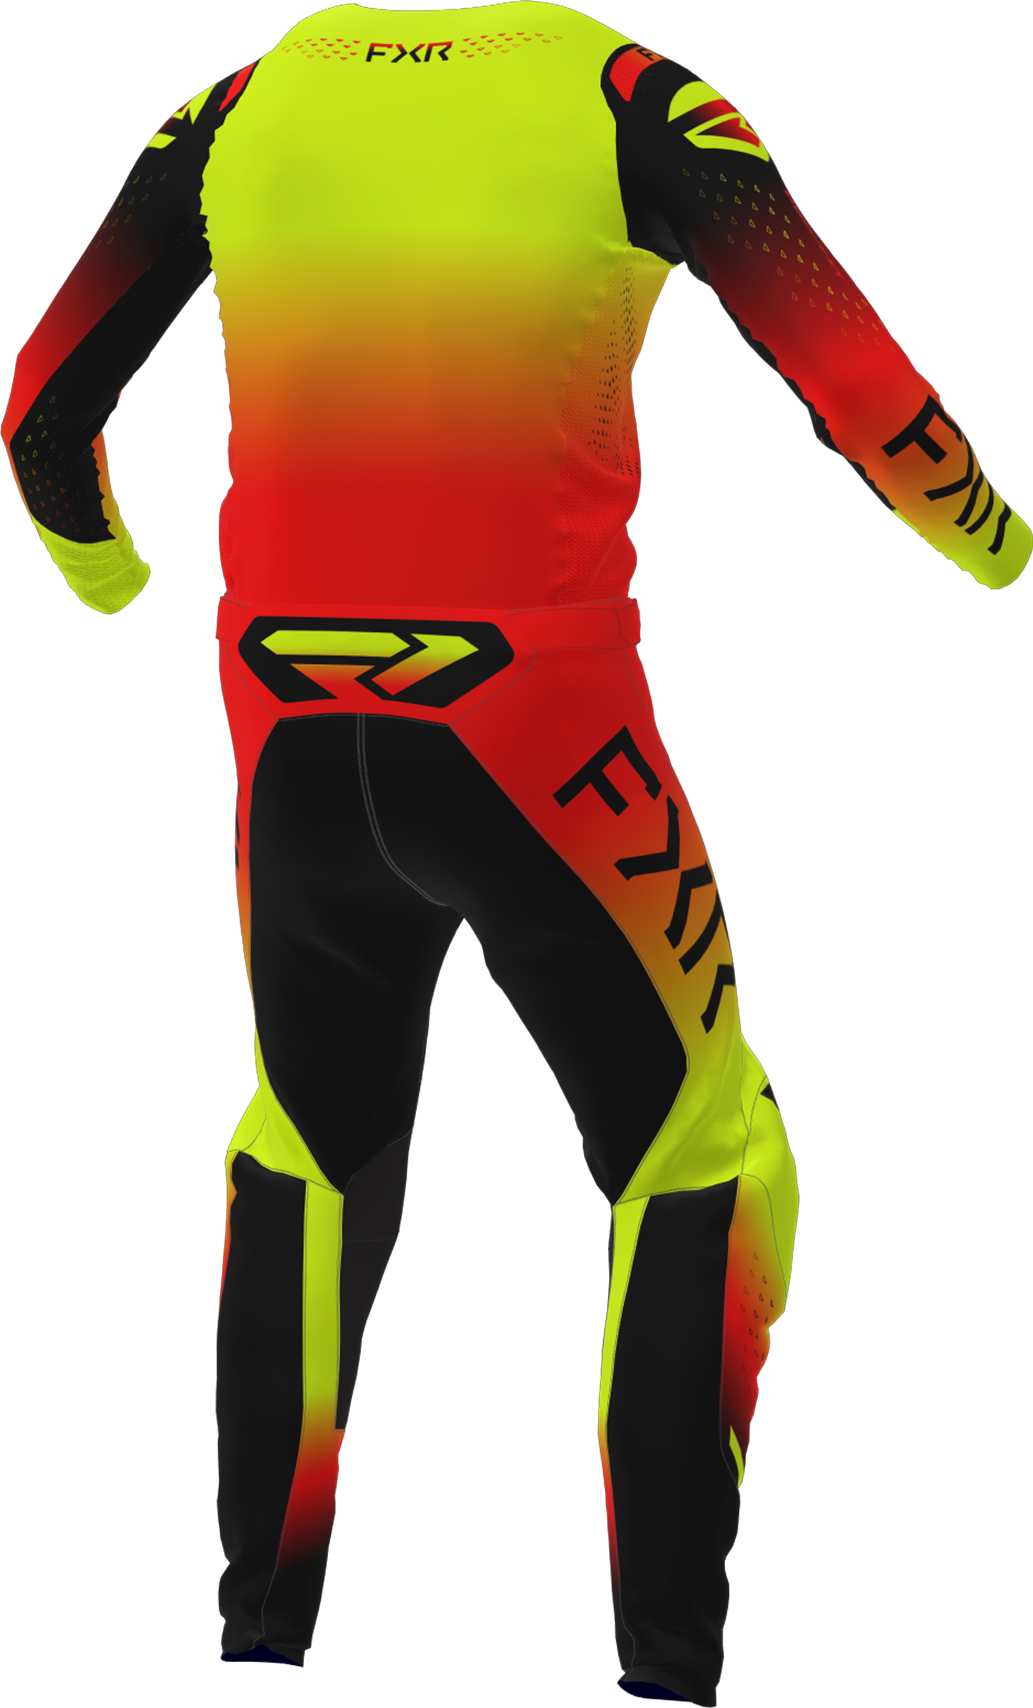 A 3D image of FXR's Helium MX Jersey and Pant in Ignition colorway